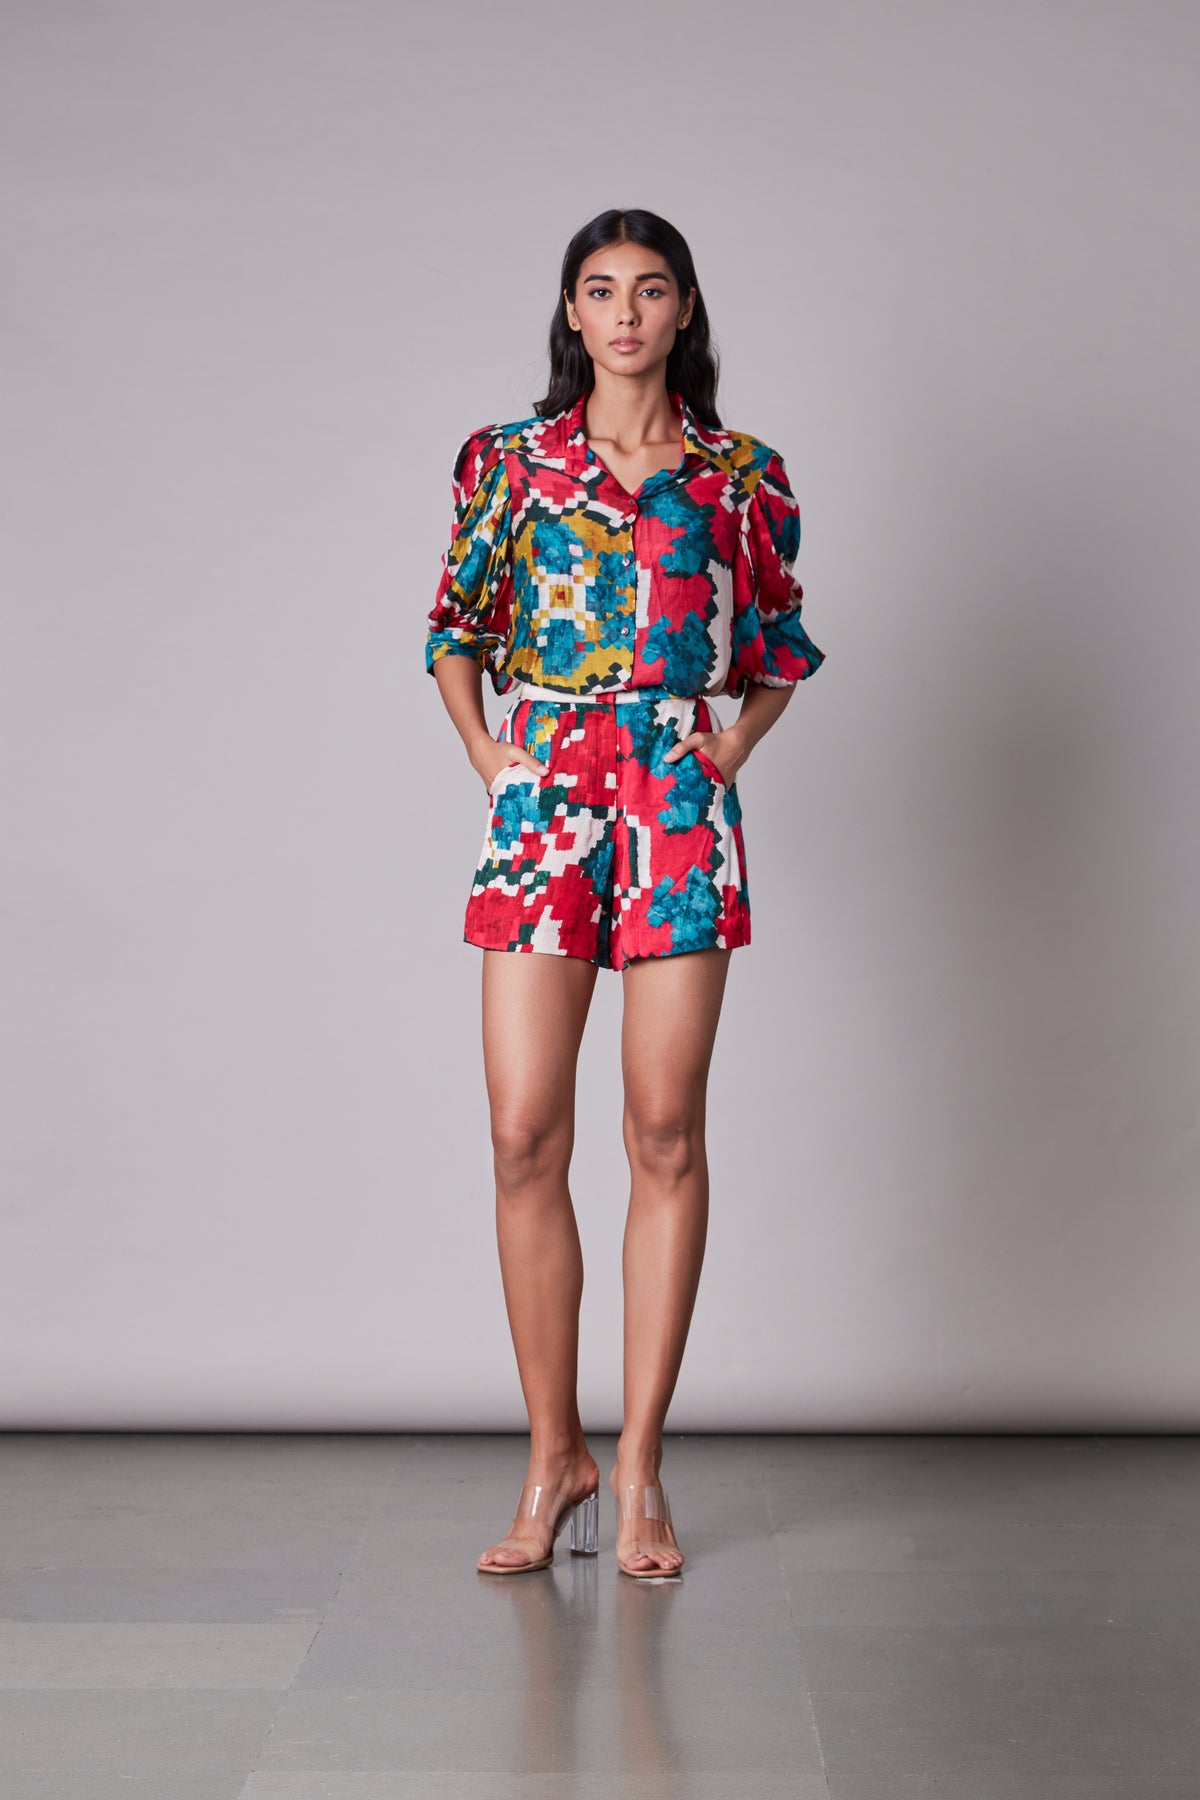 Ikat print shirt paired with shorts.